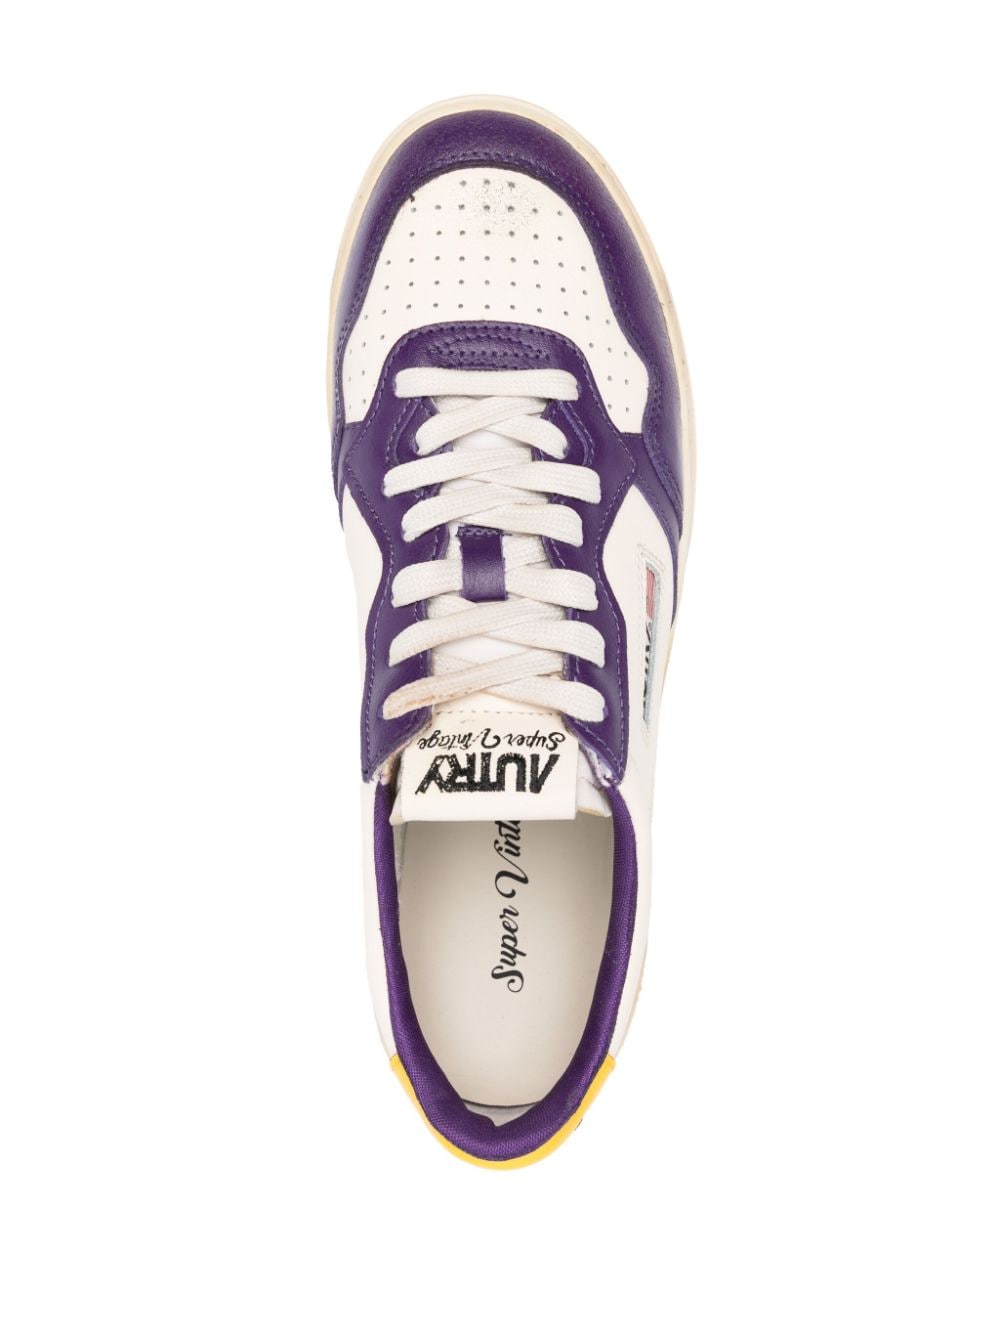 Supervintage white and purple sneaker